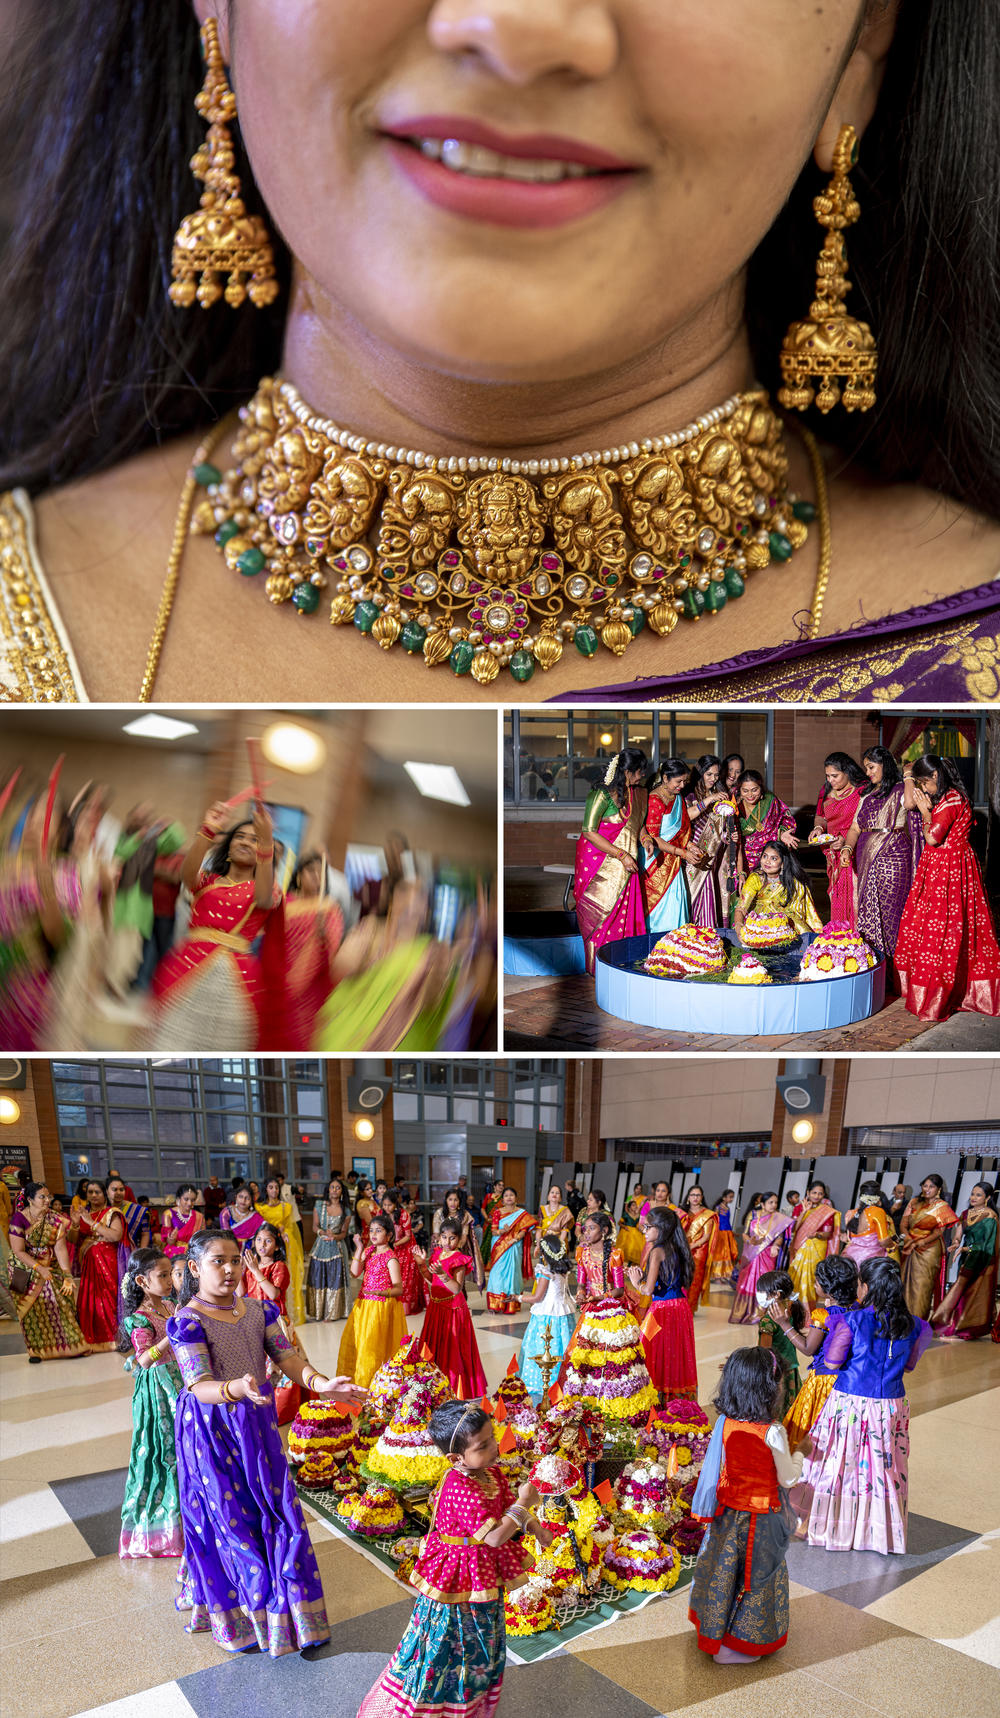 Top: Vasundhara Sistla, 40, wears a piece of jewelry designed with an image of the mother goddess Durga at a Bathukamma festival celebration. Above, left: Amulya Gundlapally, 17, plays Kolatam — a folk dance with the sticks — at the event. Above, right: Women immerse the Bathukammas in a small pool. Above: Young girls and women from the community dance around the Bathukammas.